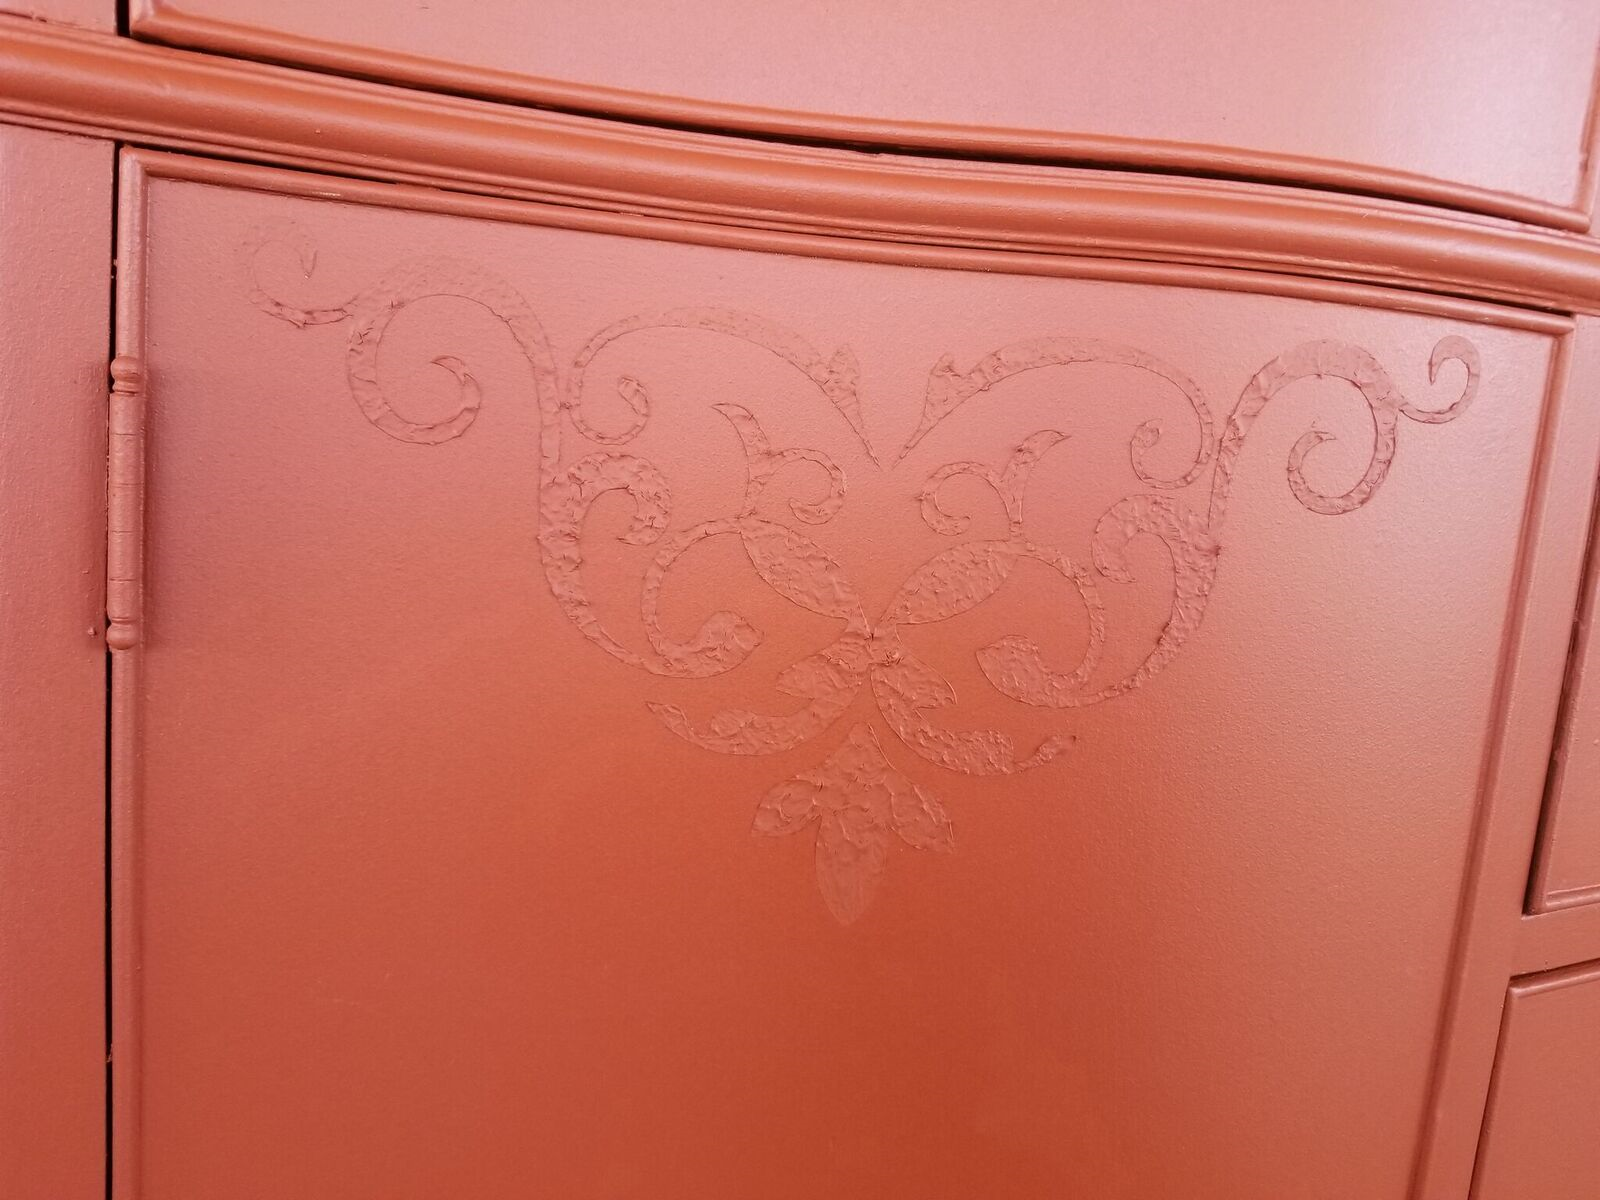 See how to accent your furniture with metallic paint using Velvet Finishes. Highlight, paint, and accent with metallics in silver, gold, or pearl using VF!